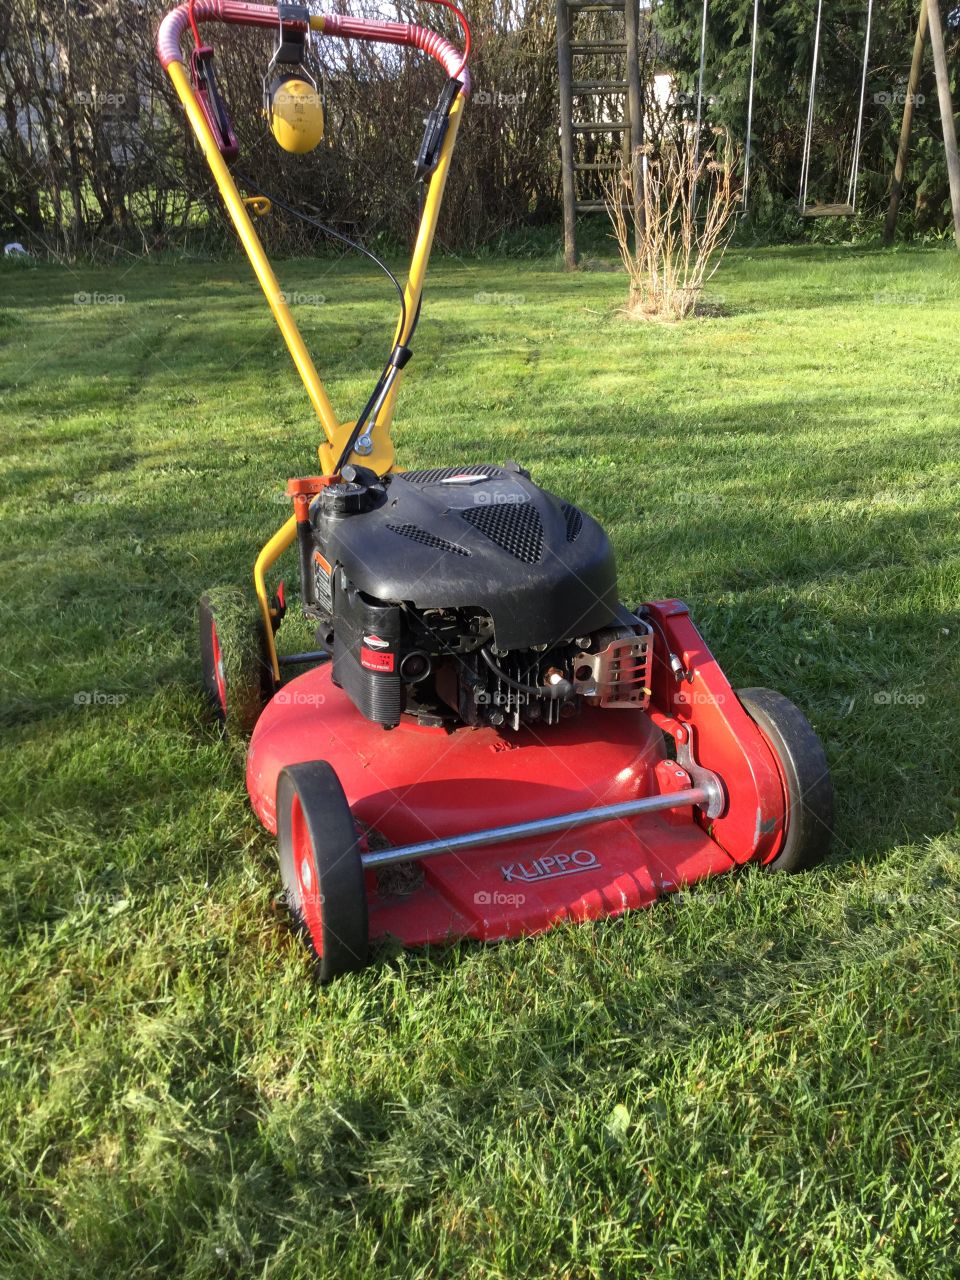 Time to cut the lawn for the first time this year.